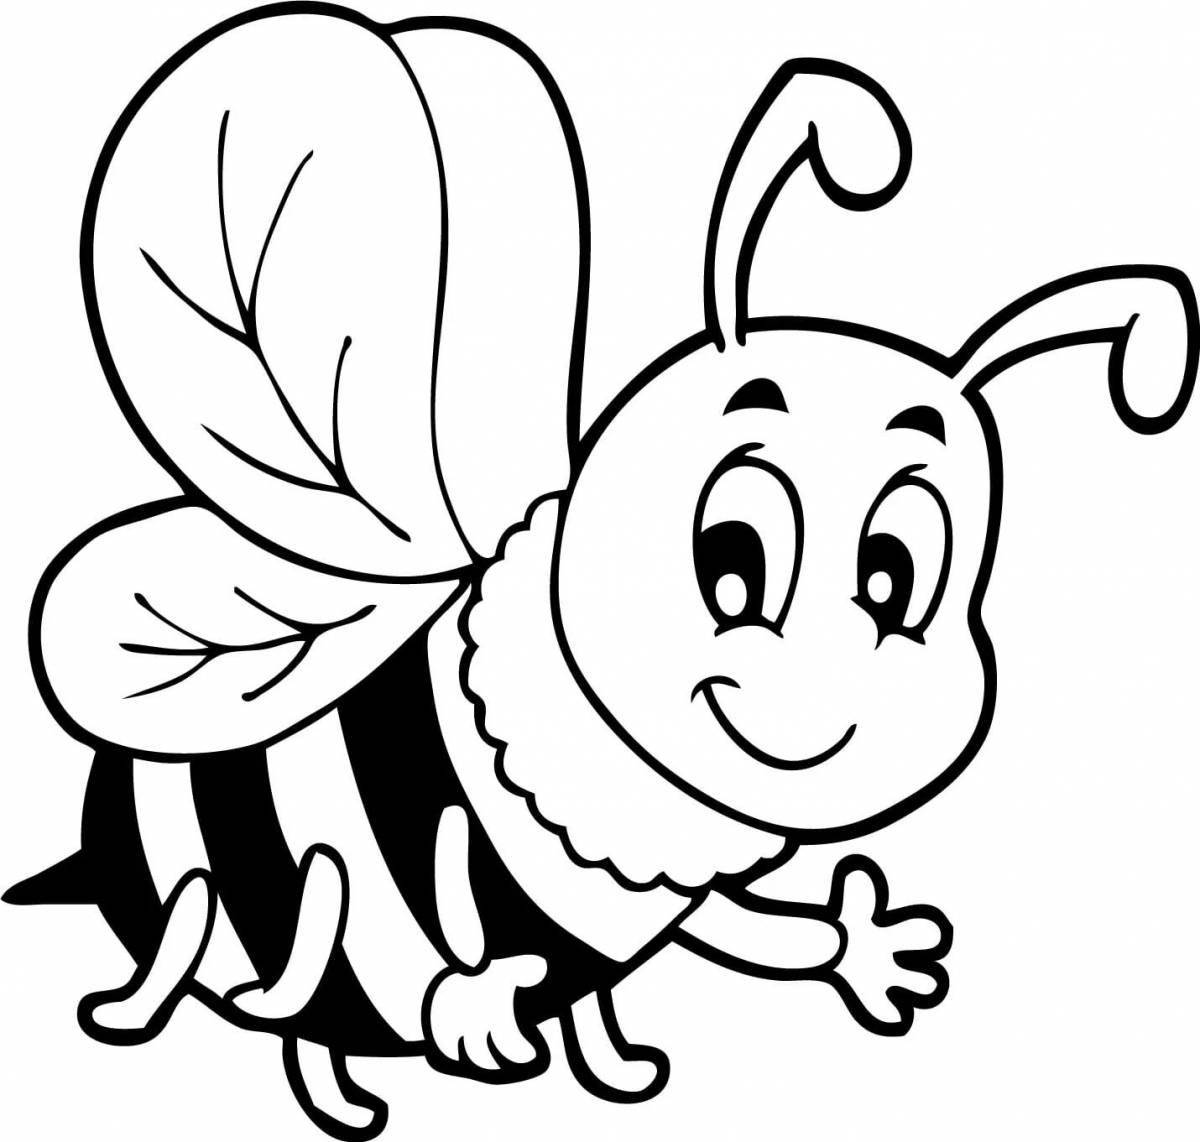 Sweet bee coloring book for children 6-7 years old